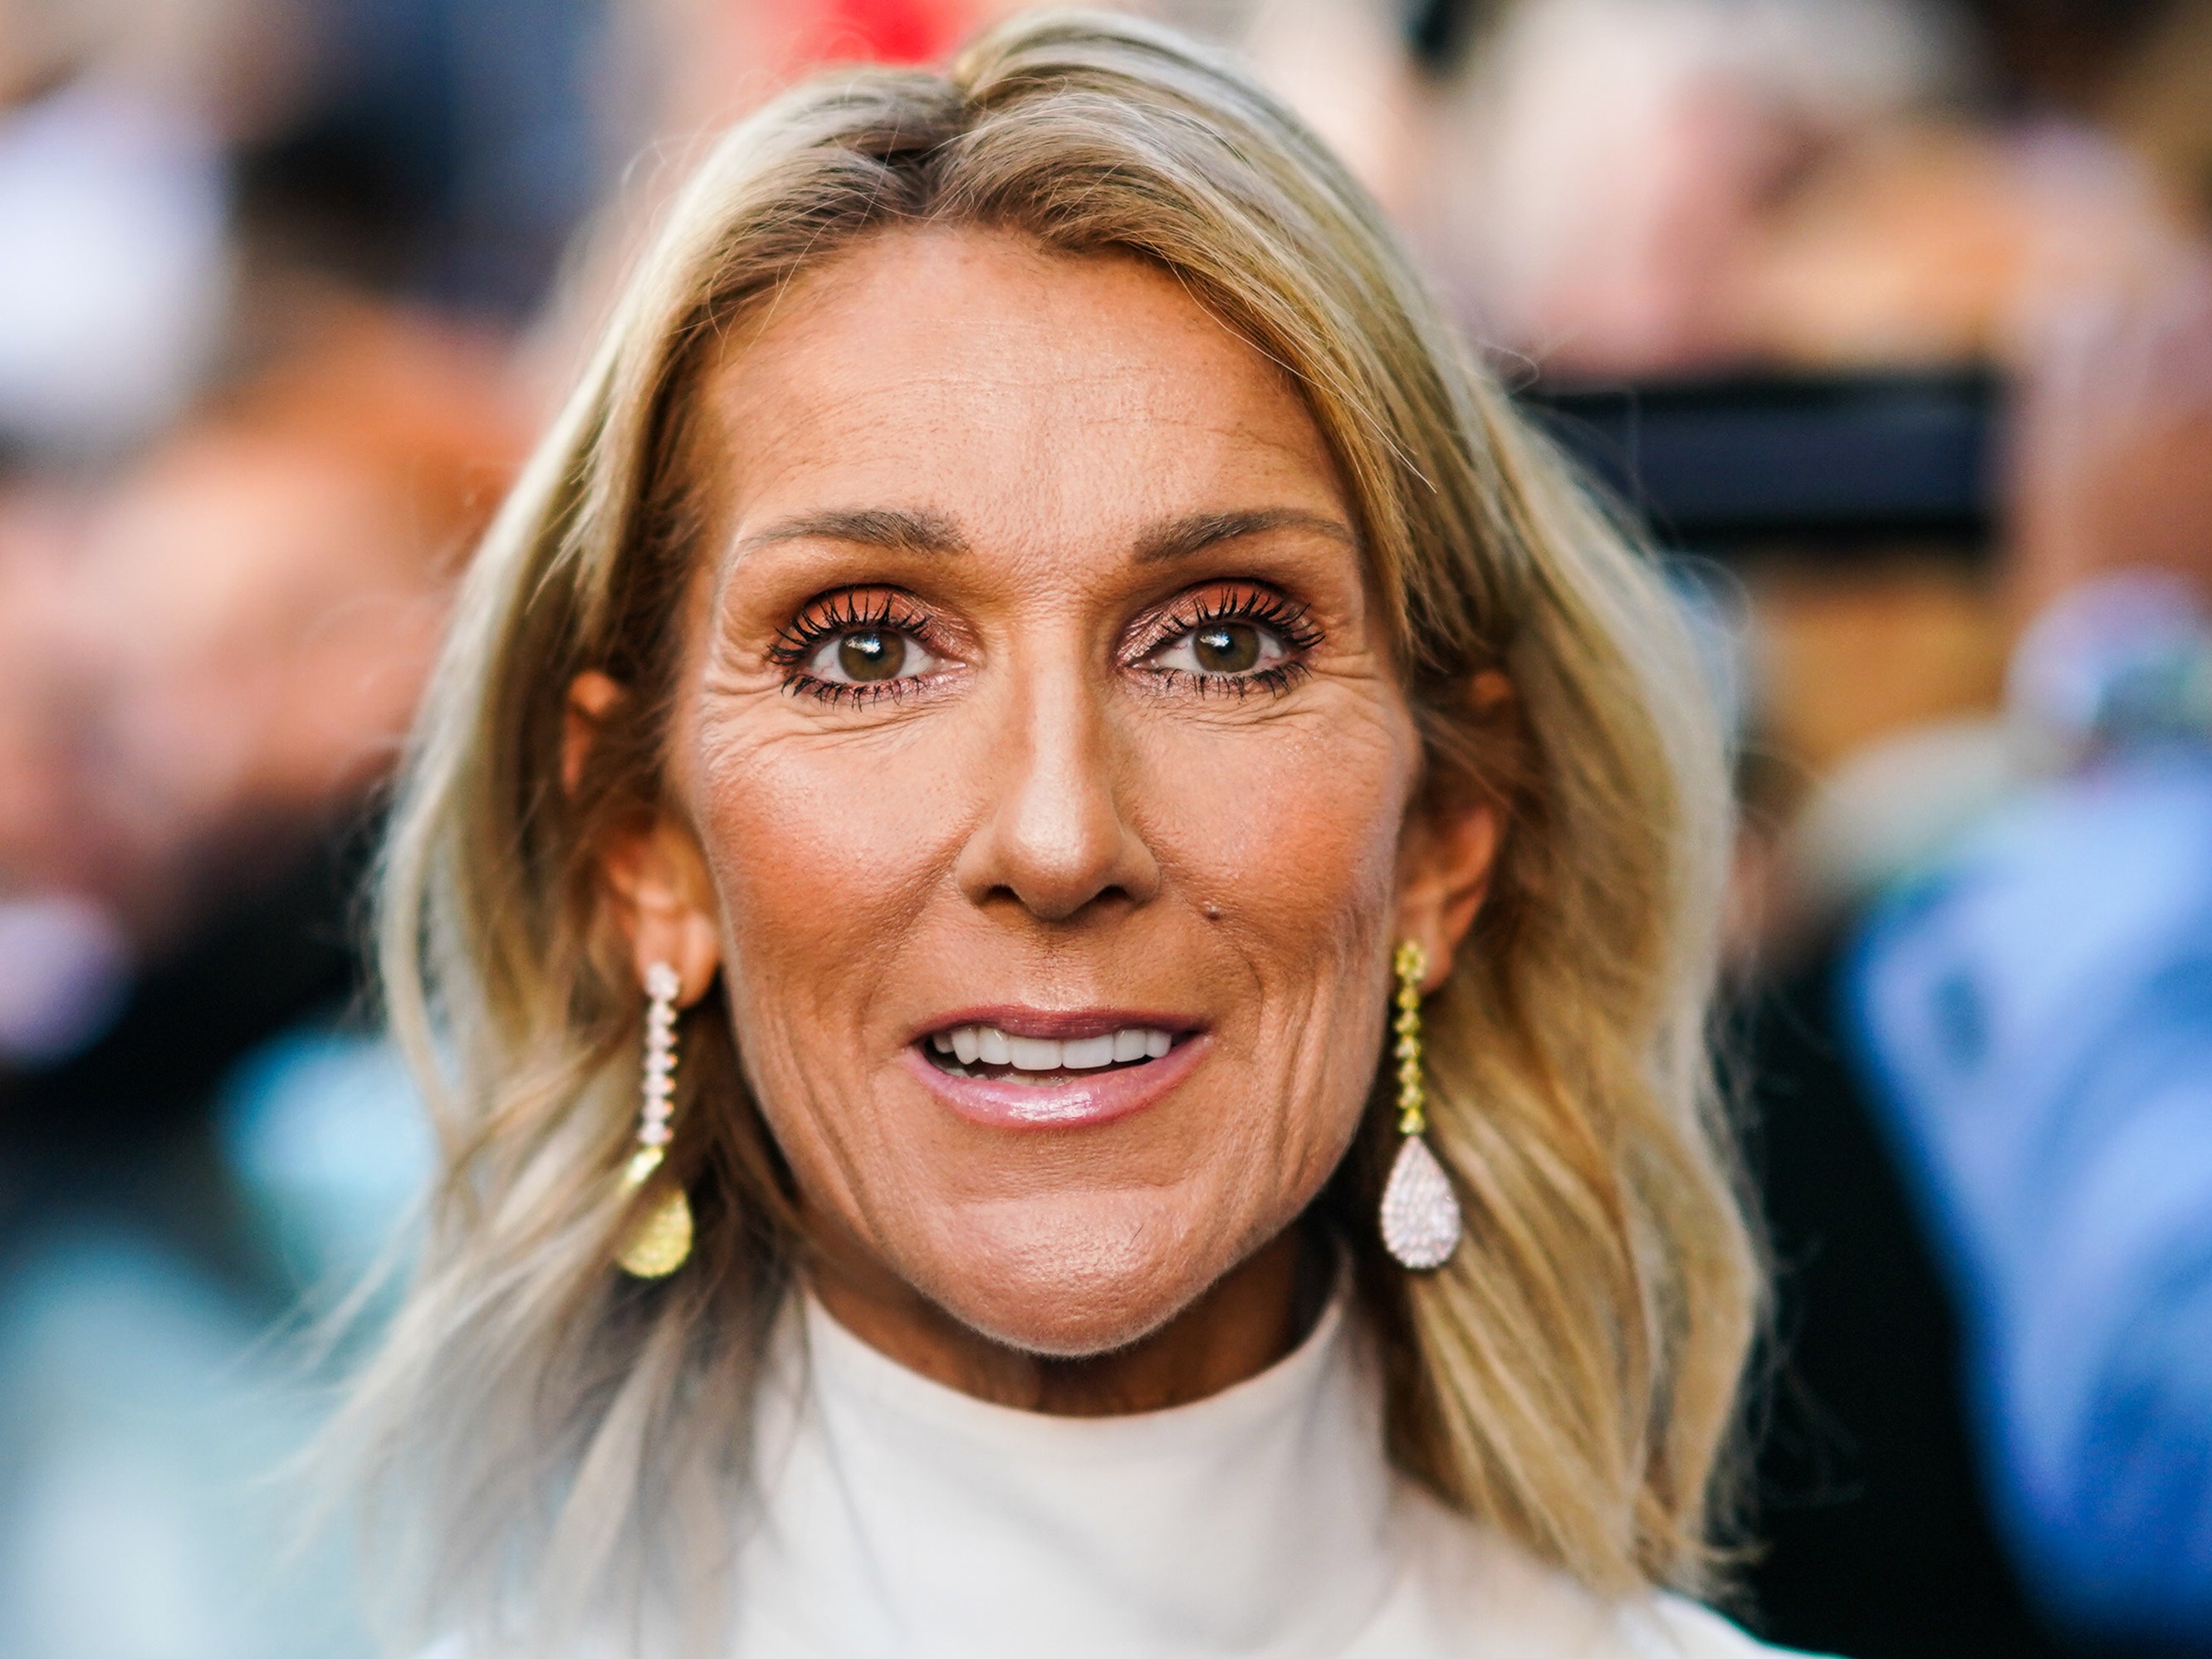 Celine Dion shares she approves of a new documentary about her 40-year career